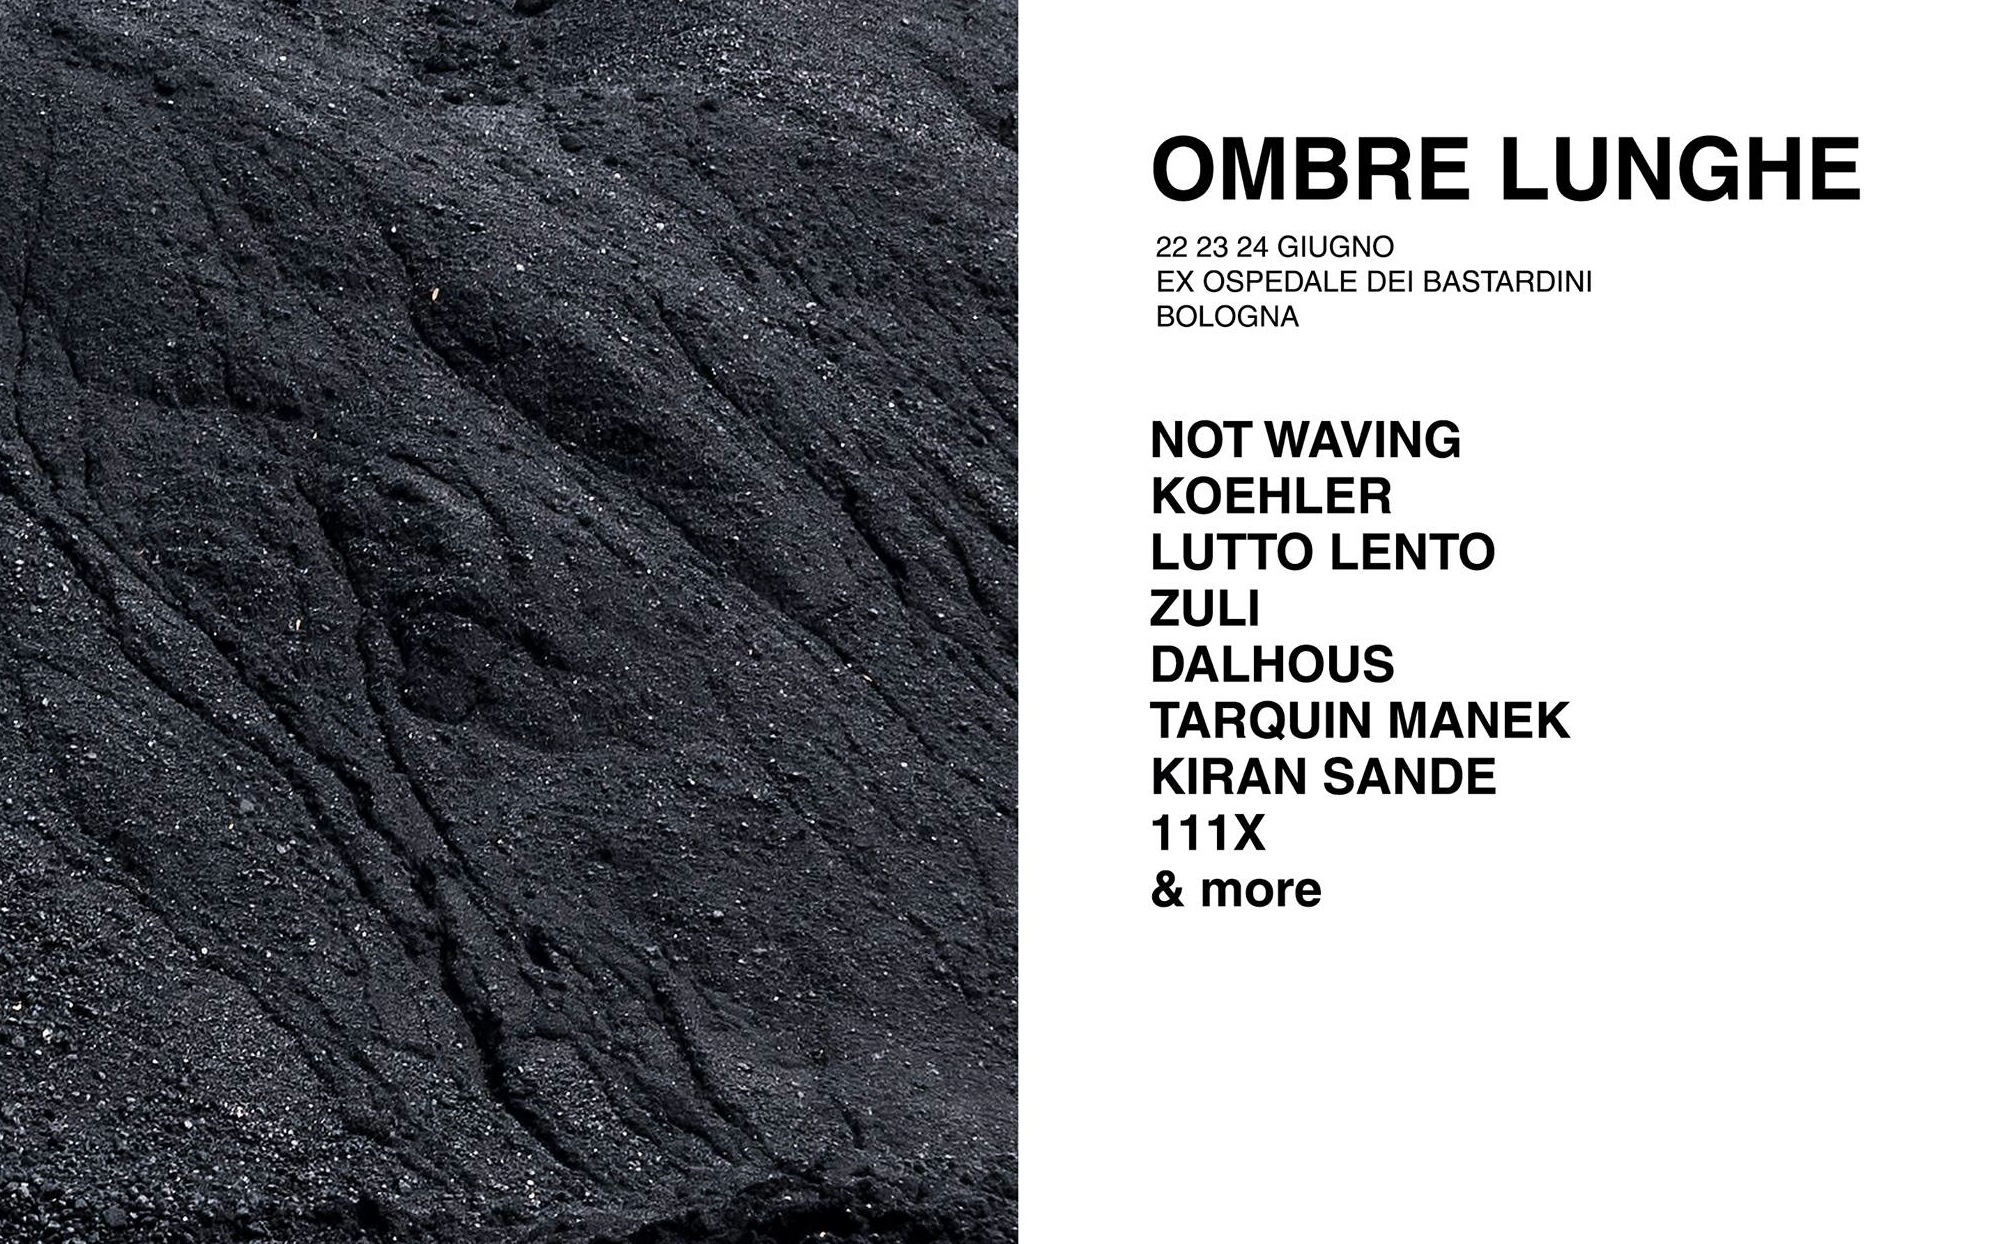 ombre-lunghe-flyer